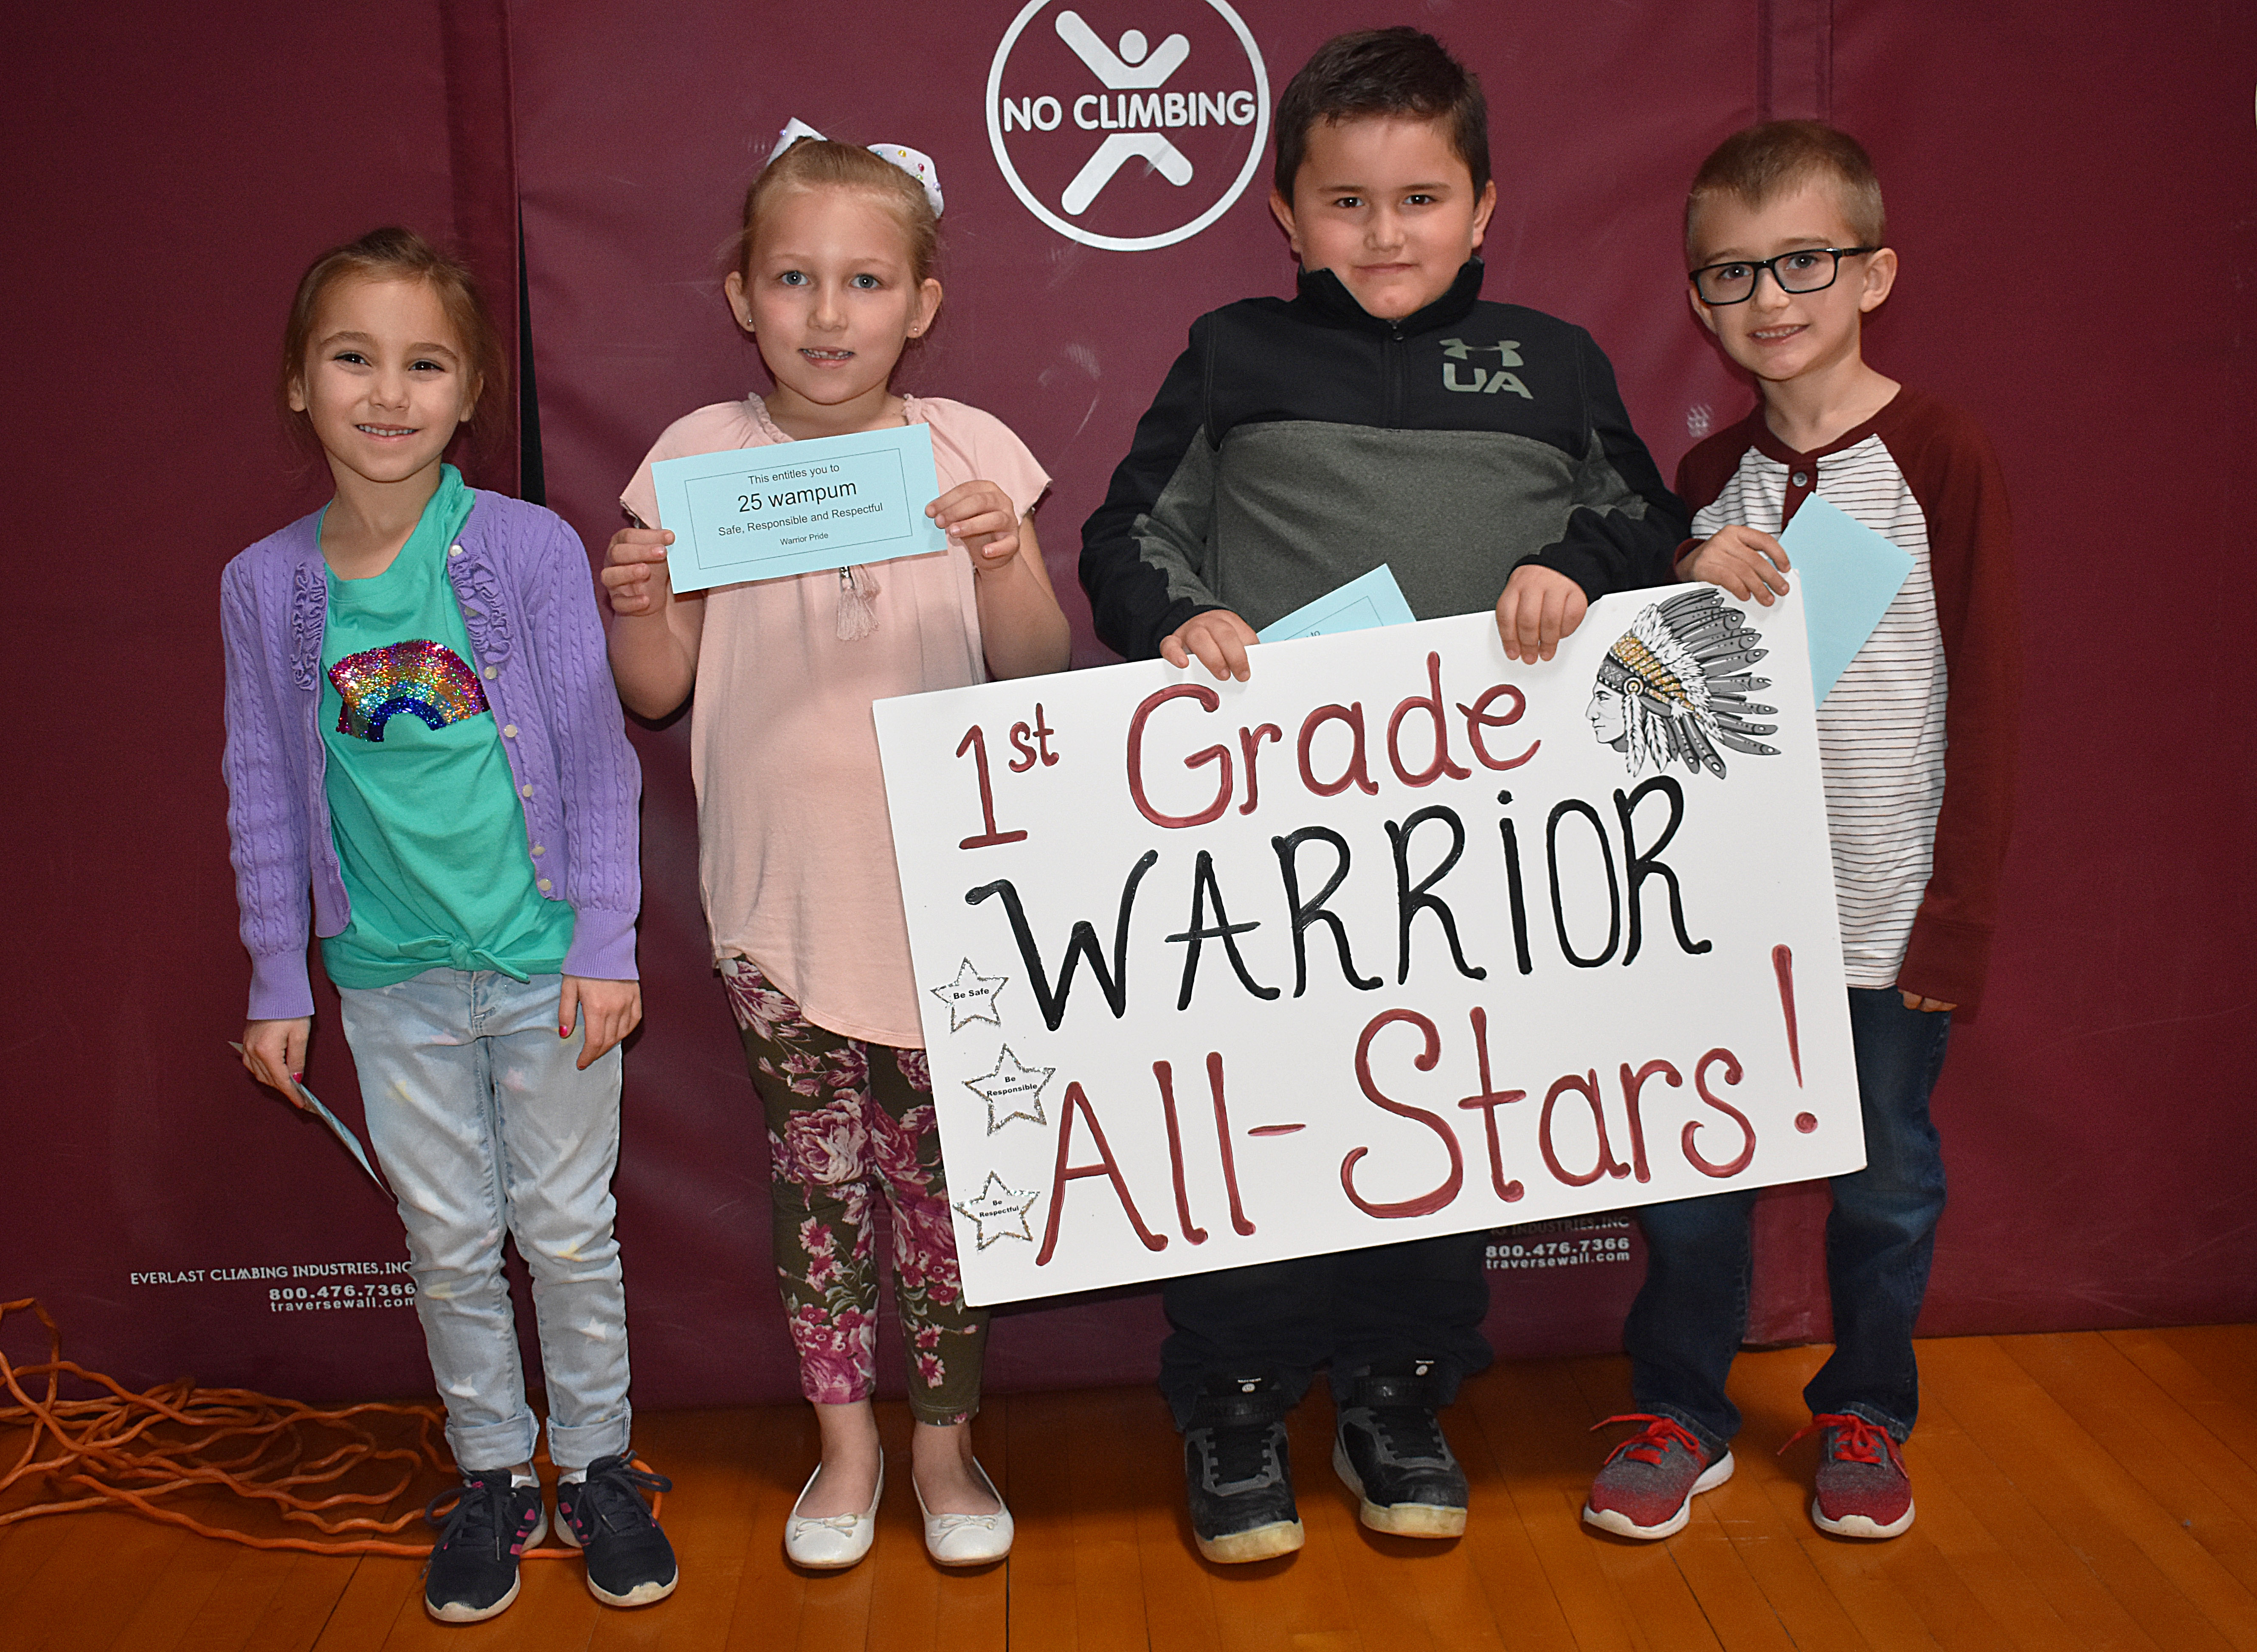 Kids standing together with first grade sign